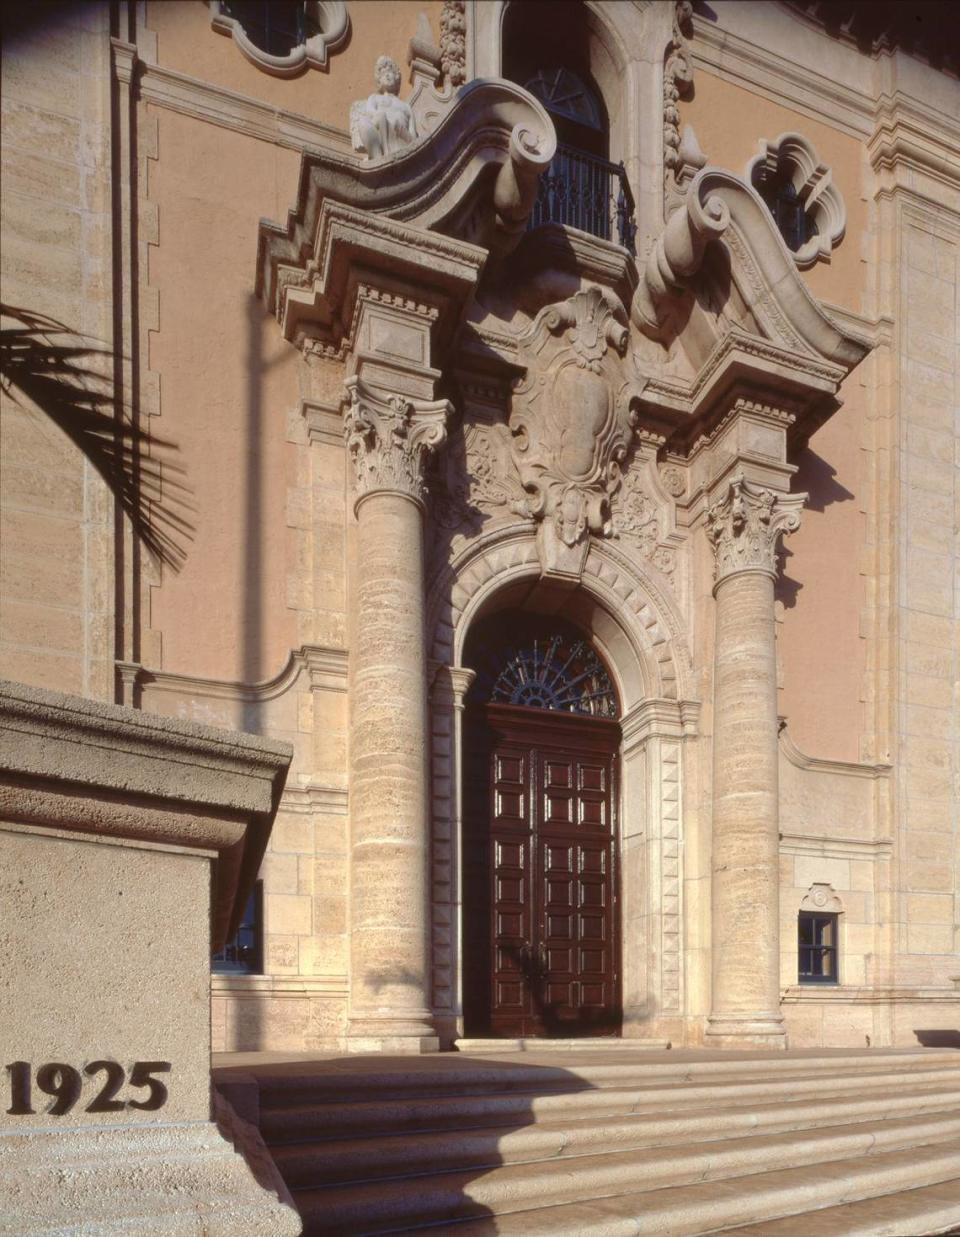 The ornate Baroque entrance to the Freedom Tower on Biscayne Boulevard in downtown Miami is seen after the 1925 building received its first extensive renovations in the late 1980s